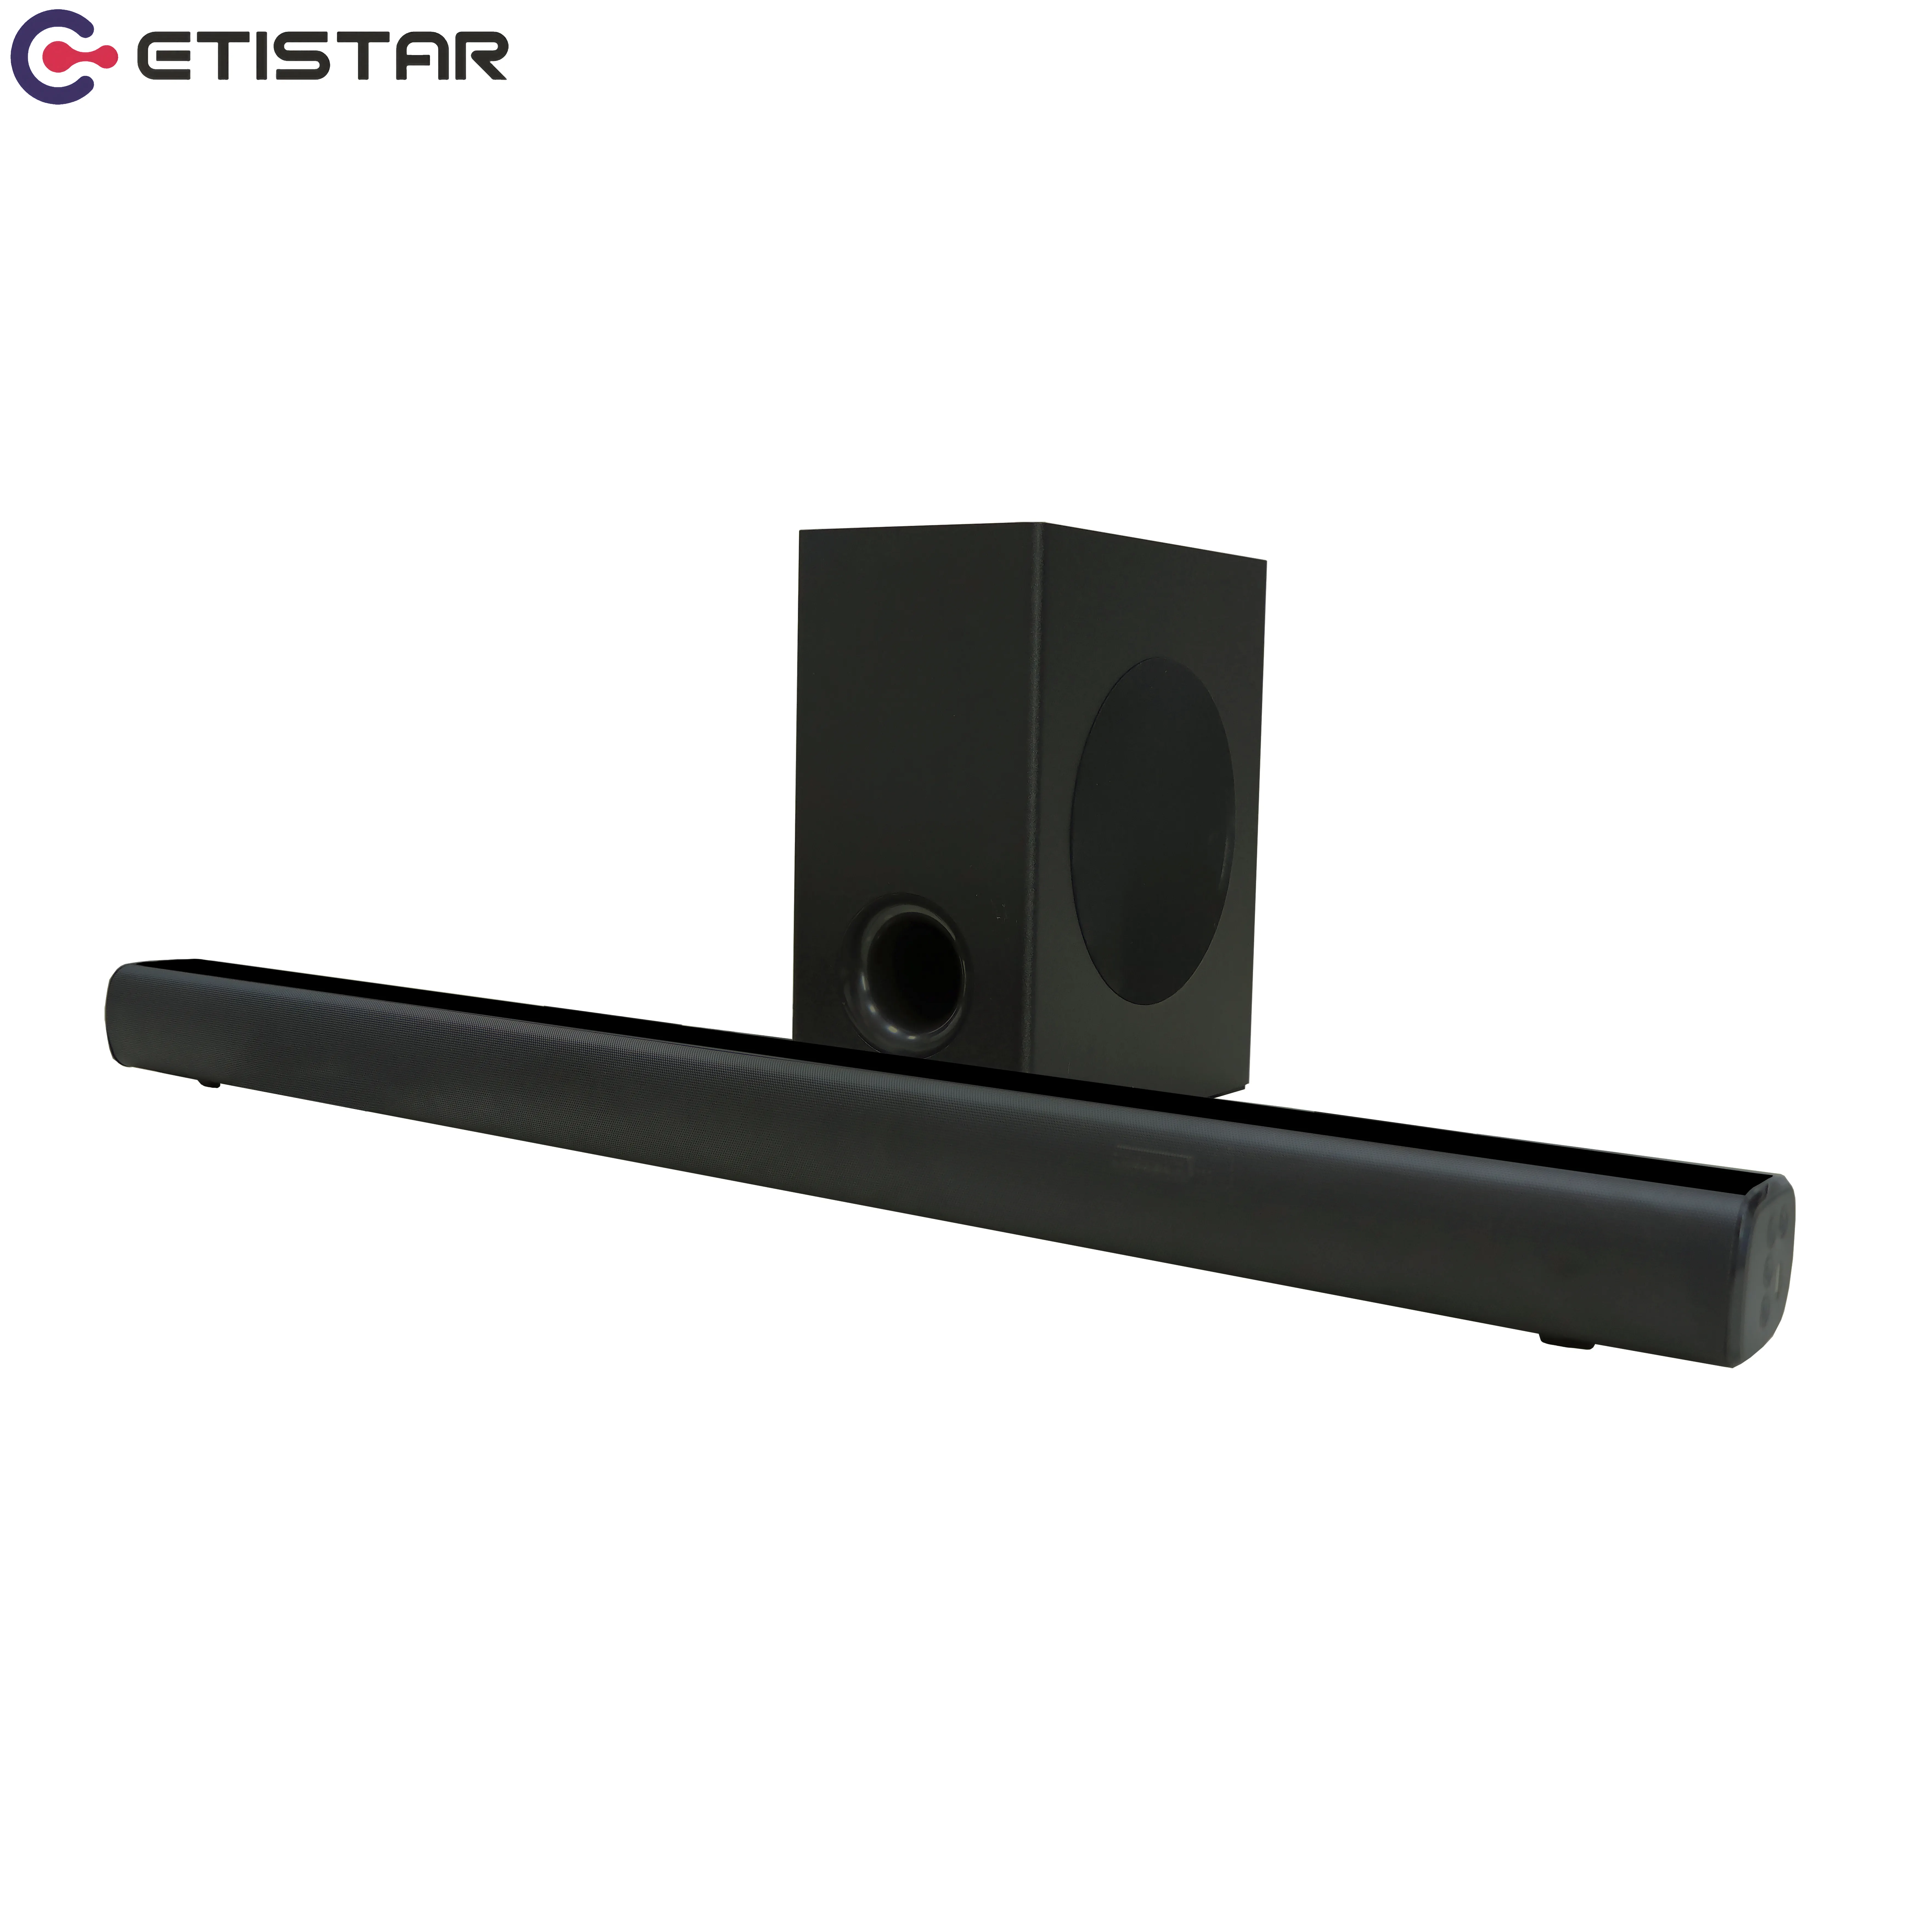 High Sound Quality Sound bar With Subwoofer 120W Bluetooth Wireless 2.1 home theatre system SoundBar Speaker For Tv Pc